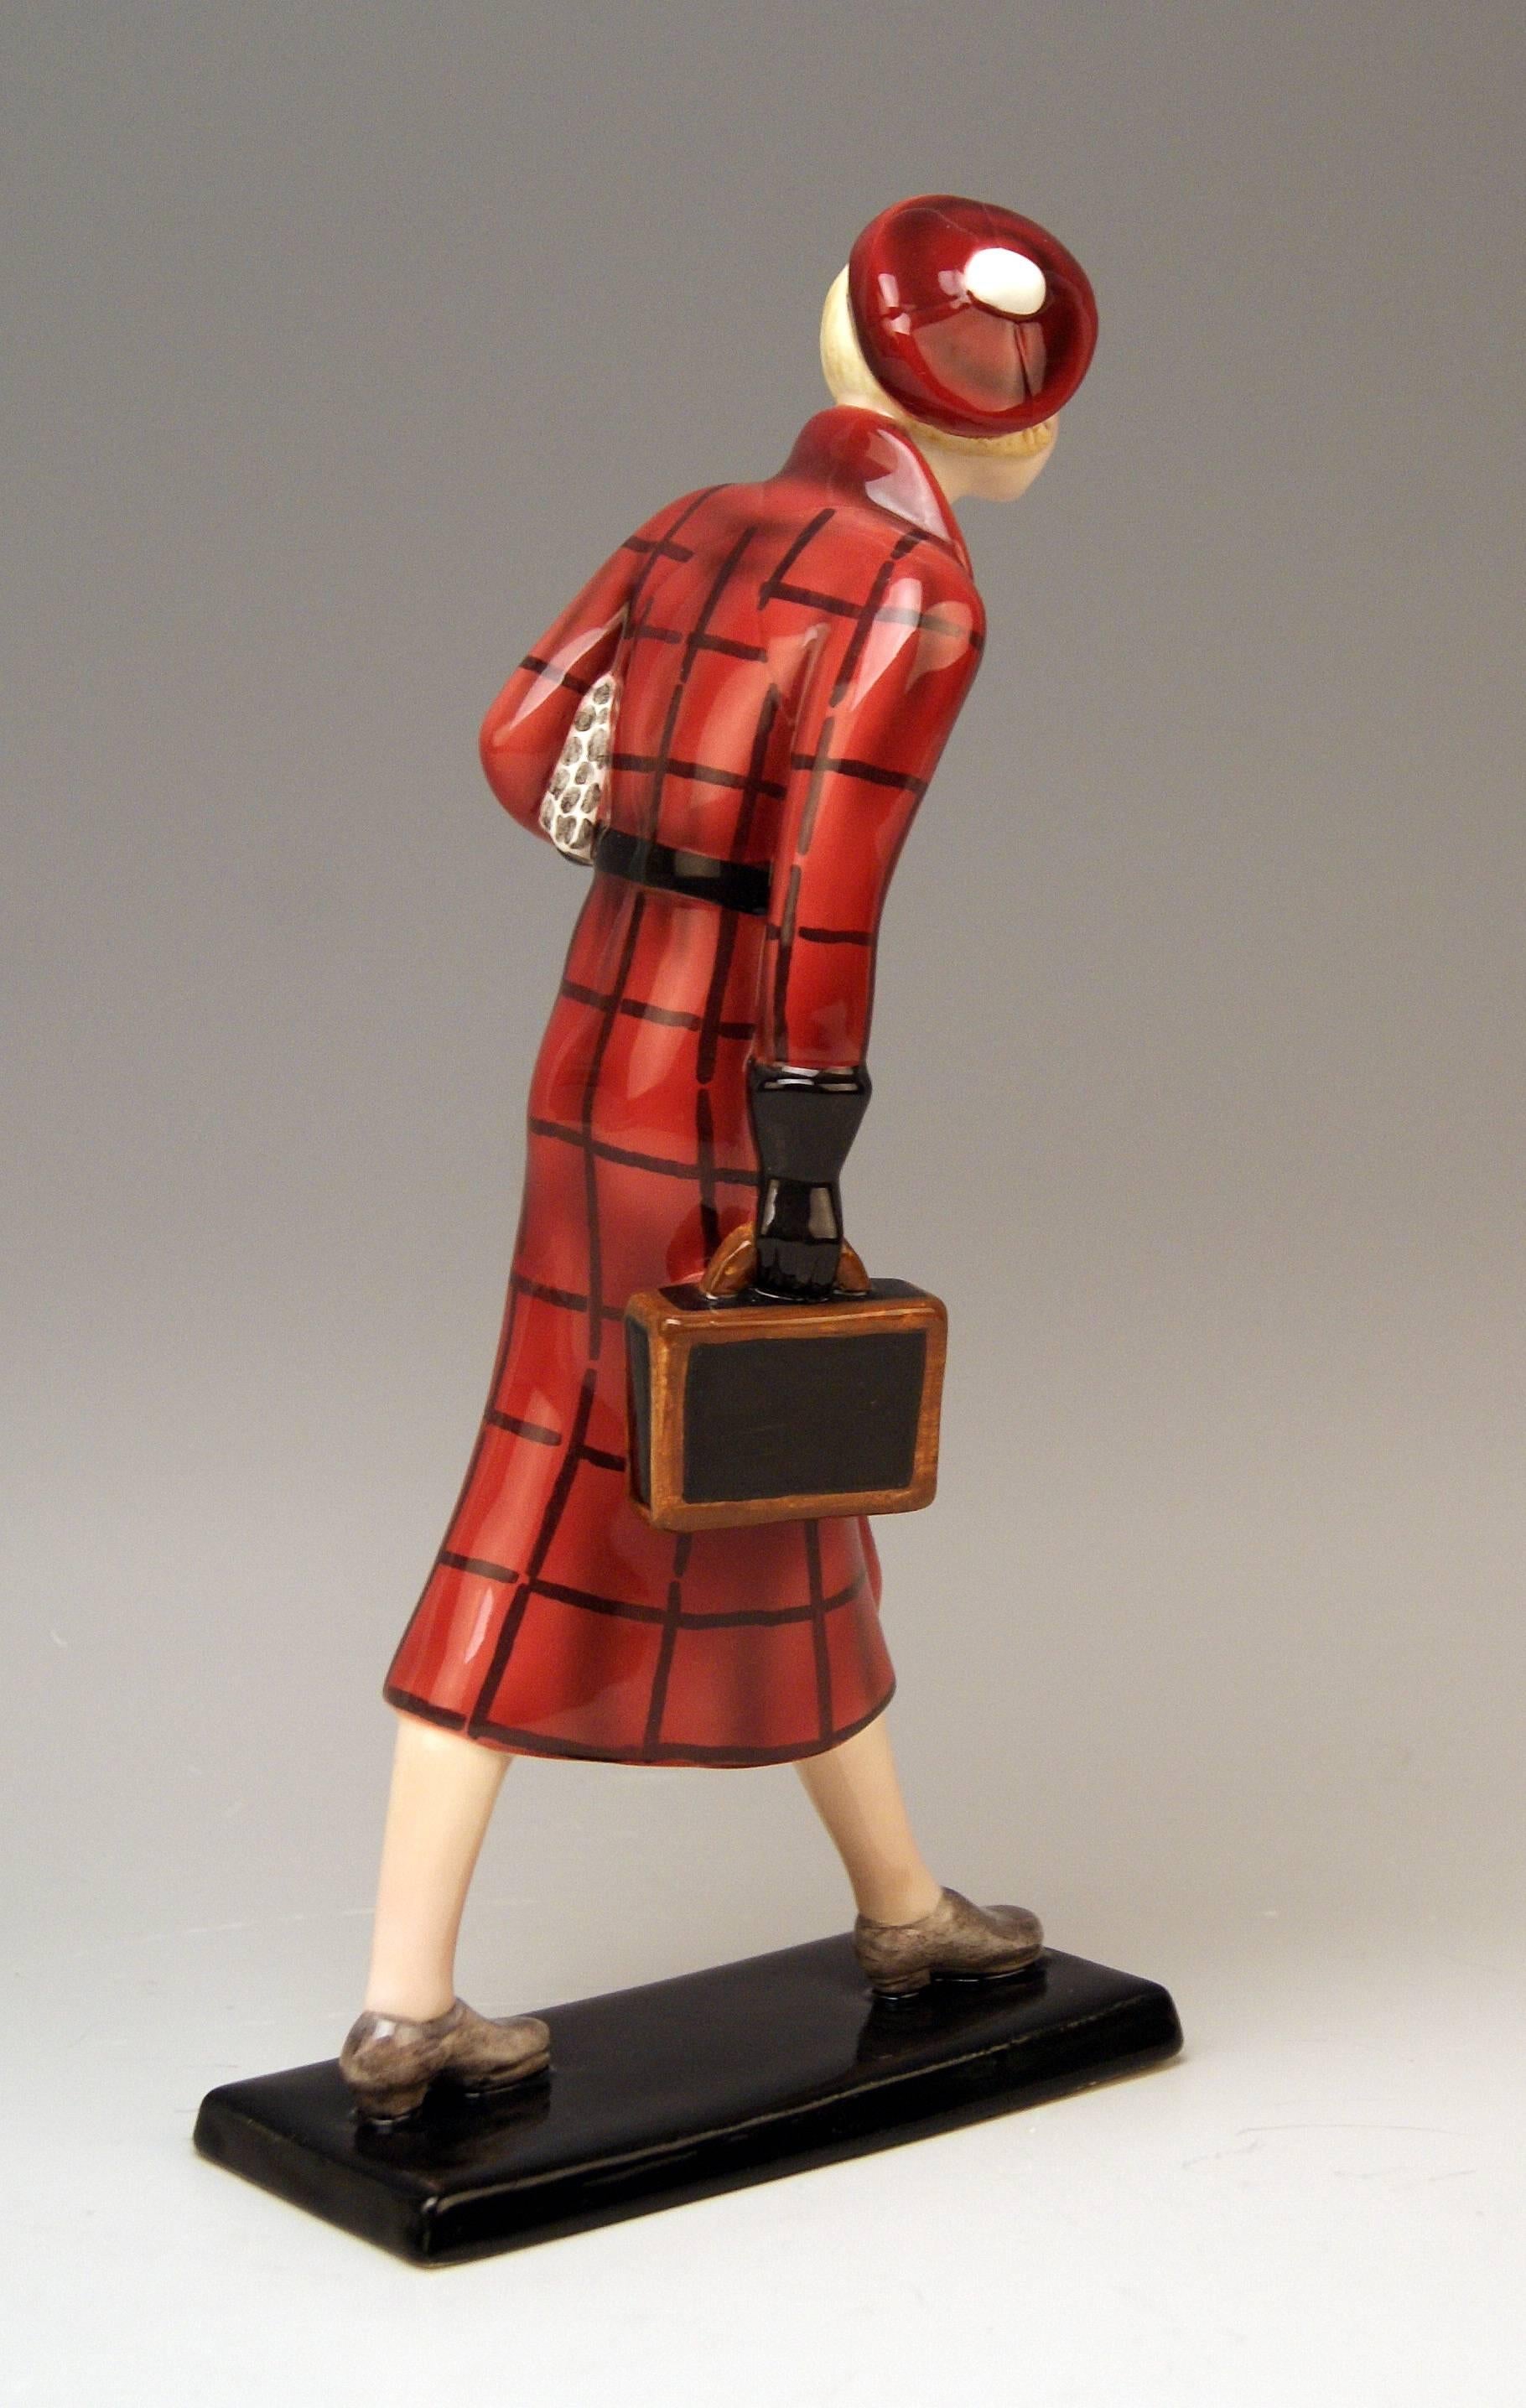 Goldscheider Vienna rarest lady figurine: The traveller with small suitcase.

Possibly designed by Josef Lorenzl (1892-1950) or Stefan (= Stephen) Dakon (1904–1997).
Lorenzl was one of the most important designers having been active for